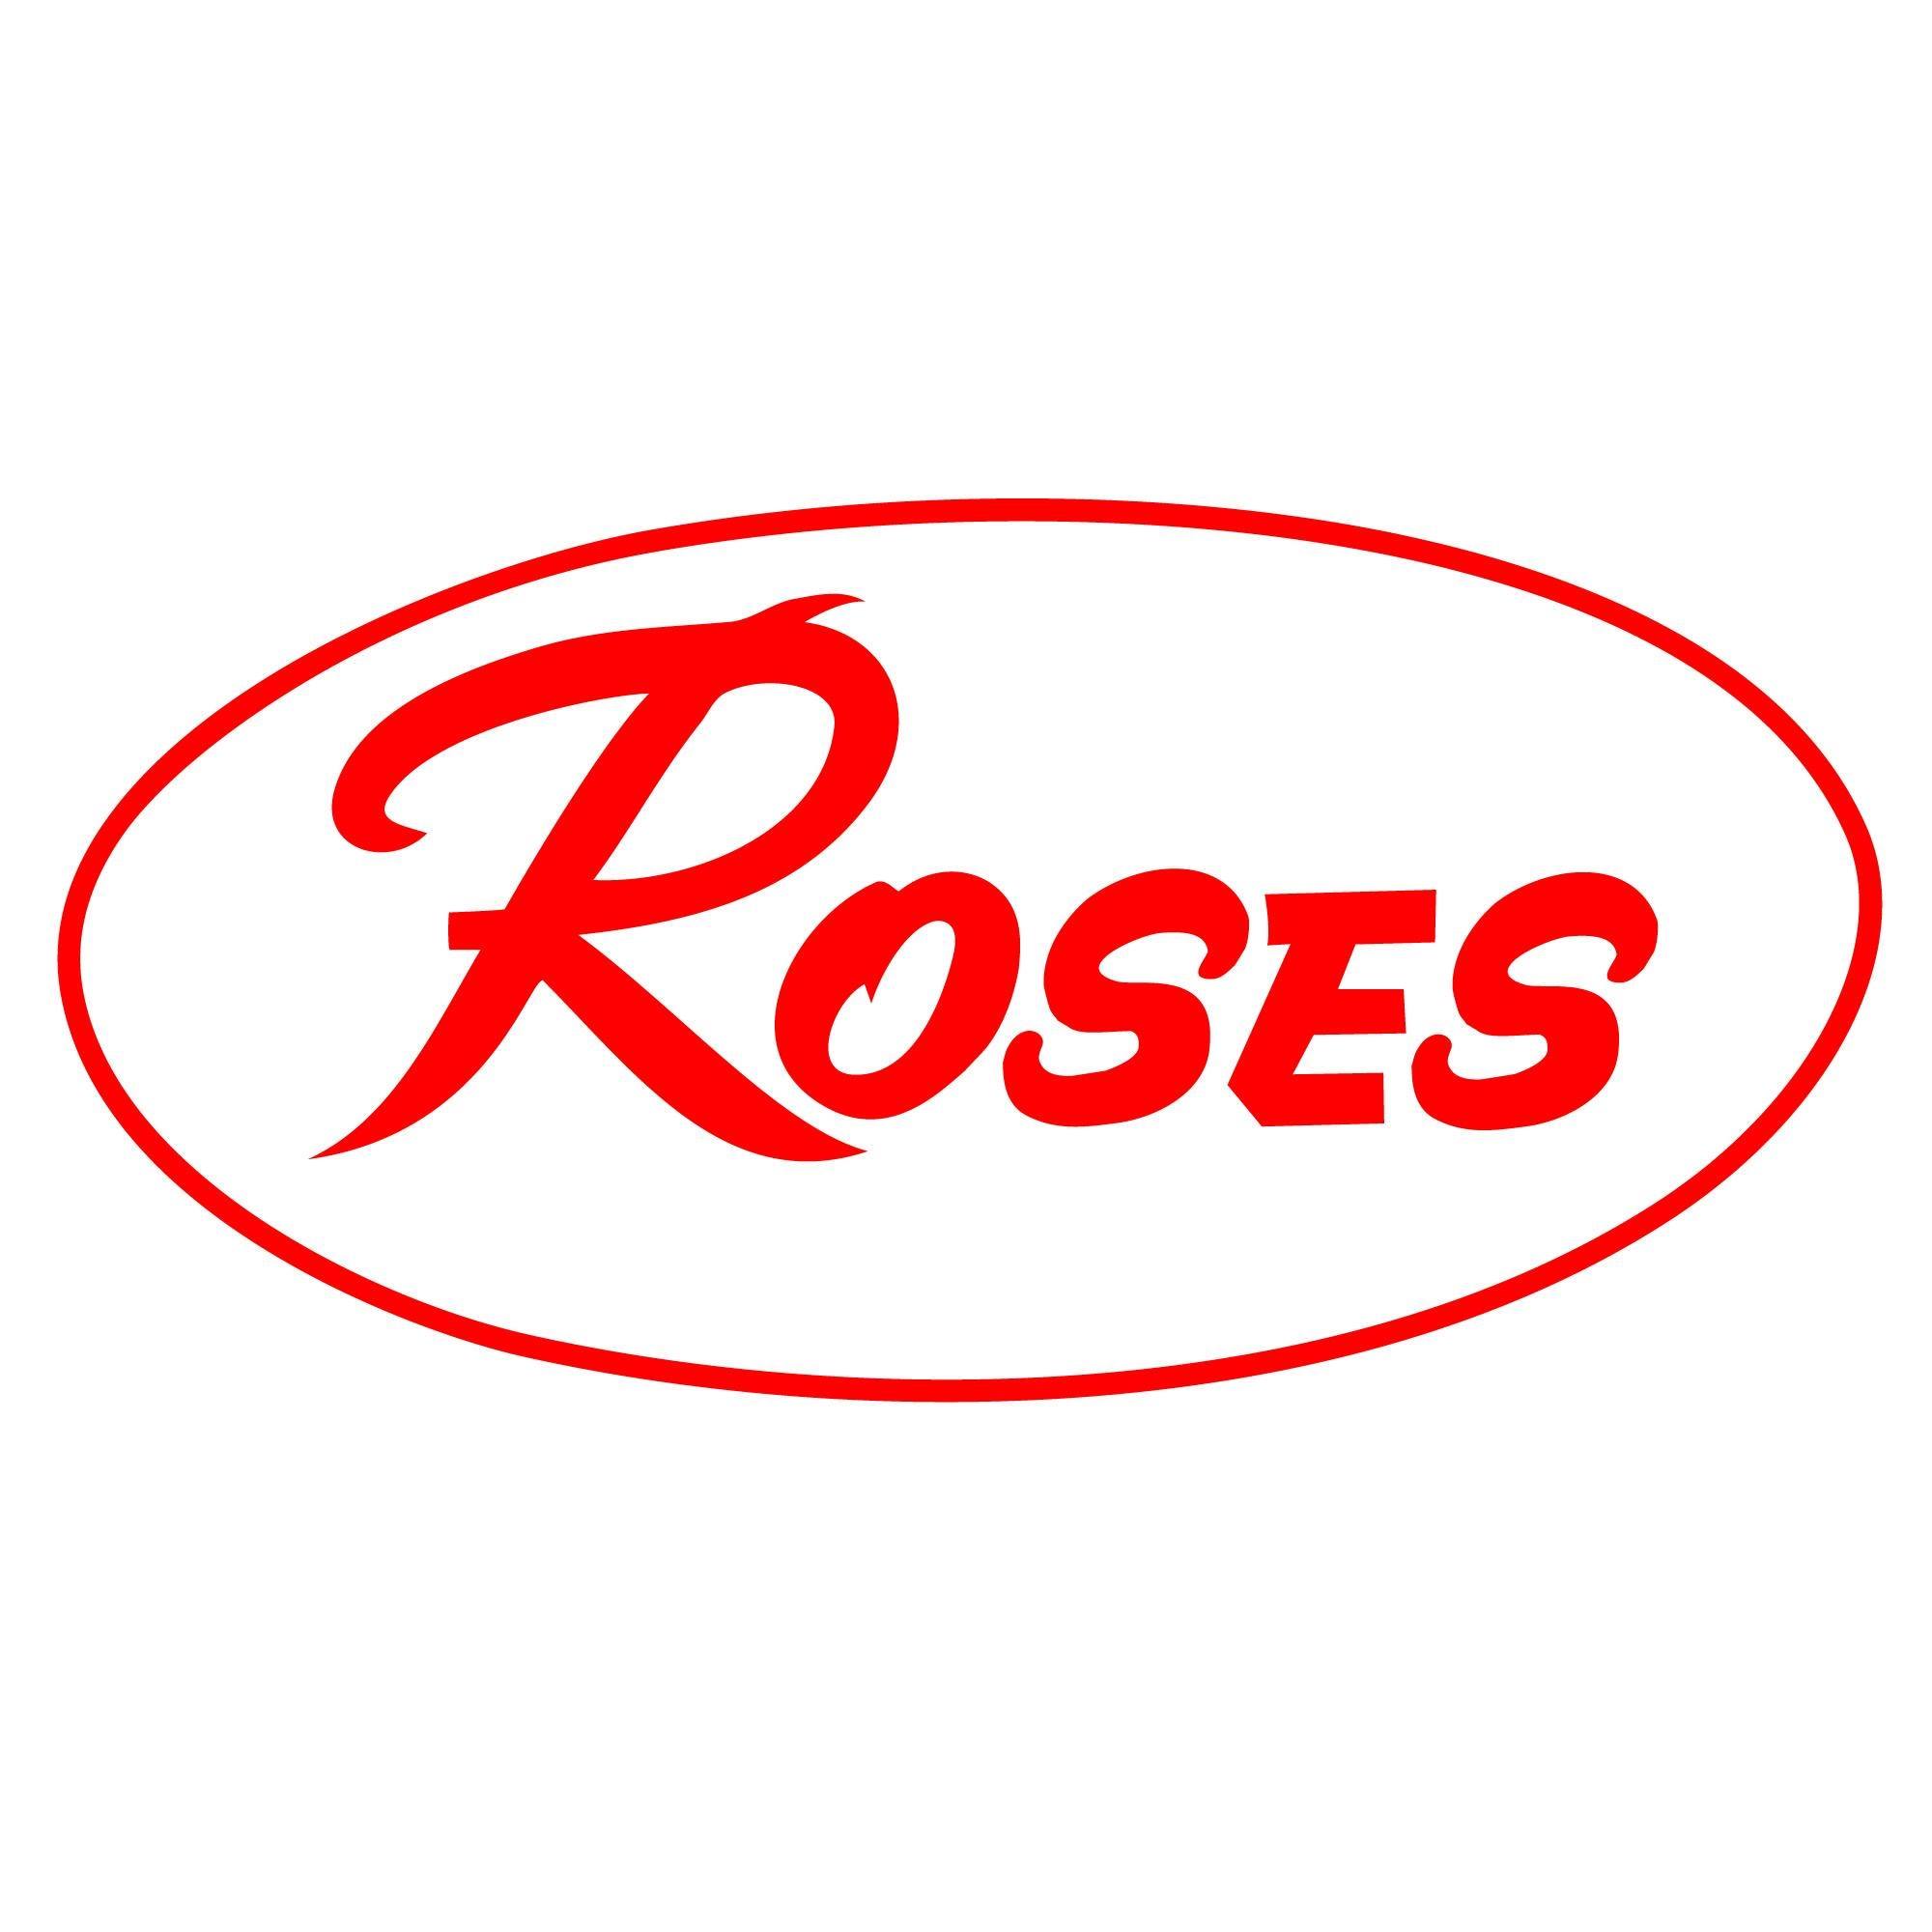 Business logo of Roses Express